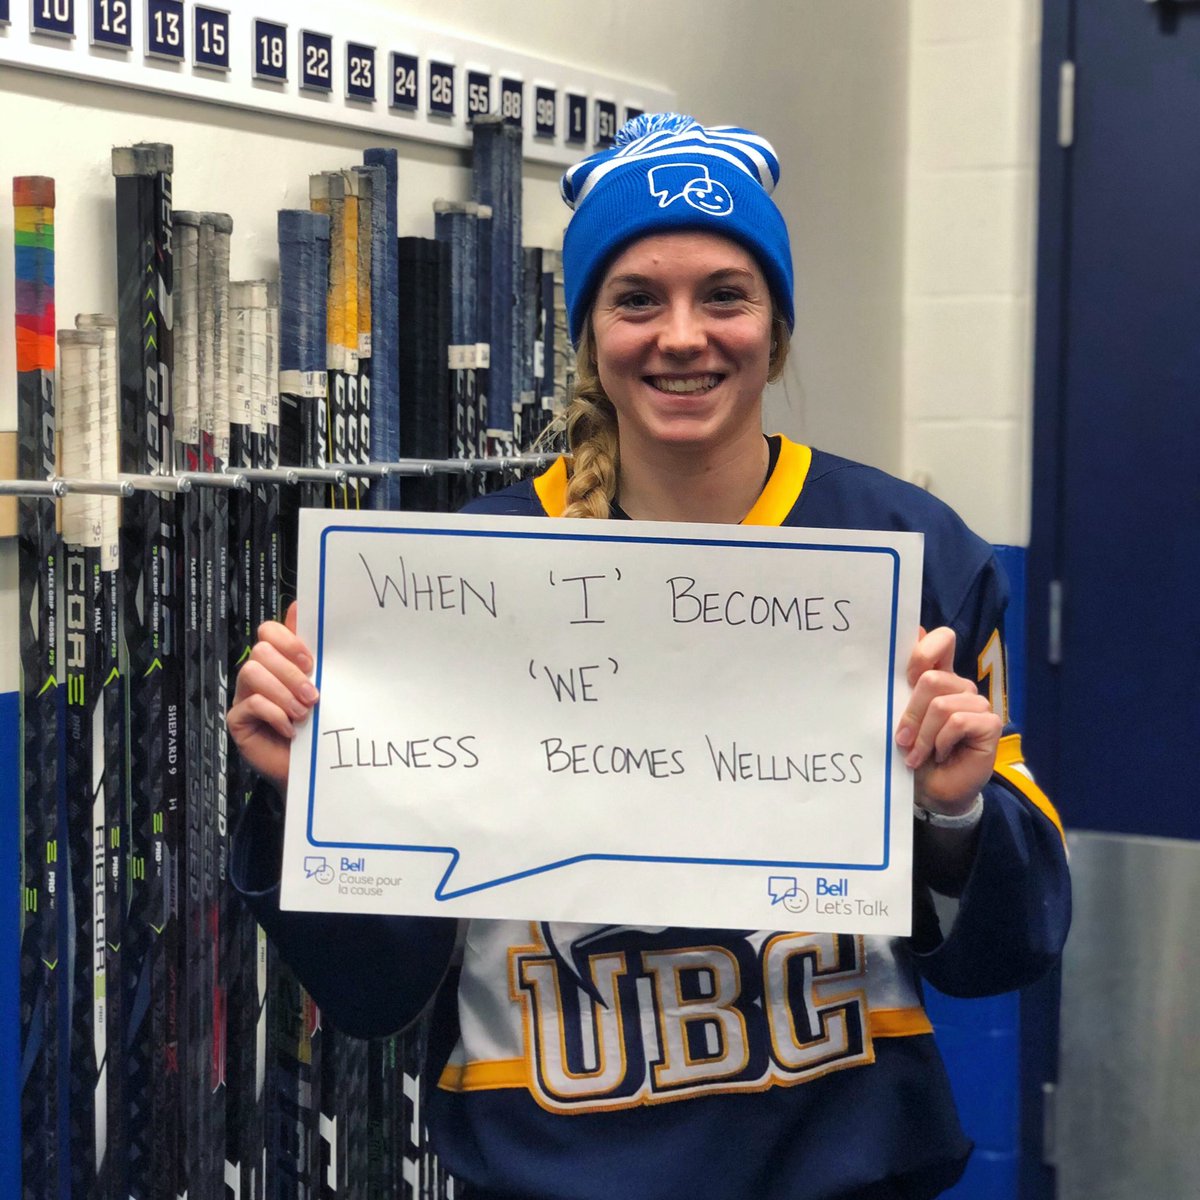 The more we talk, the more united we become in battling mental illness. For LT and all those suffering in silence, we fight! 💙 #BellLetsTalk  #startaconversation